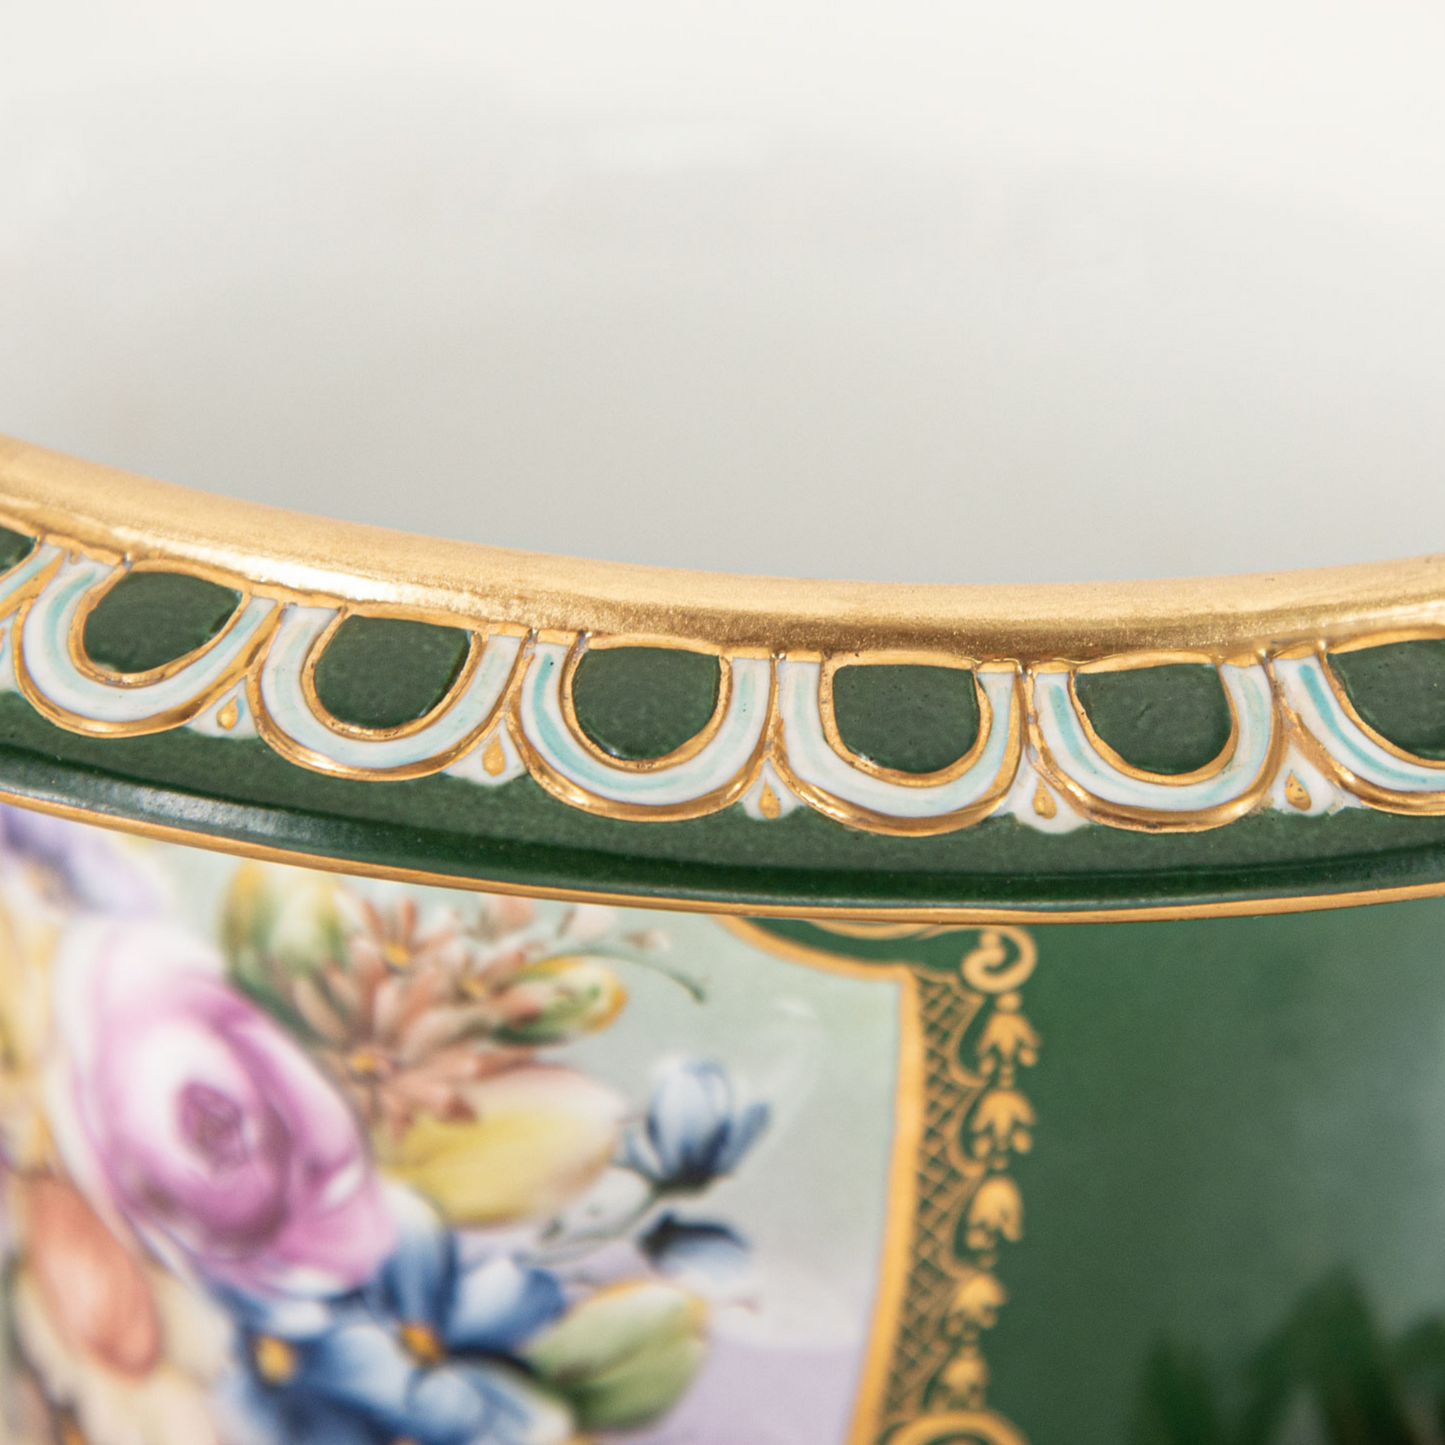 Small Rococo Style Hand-painted Vase